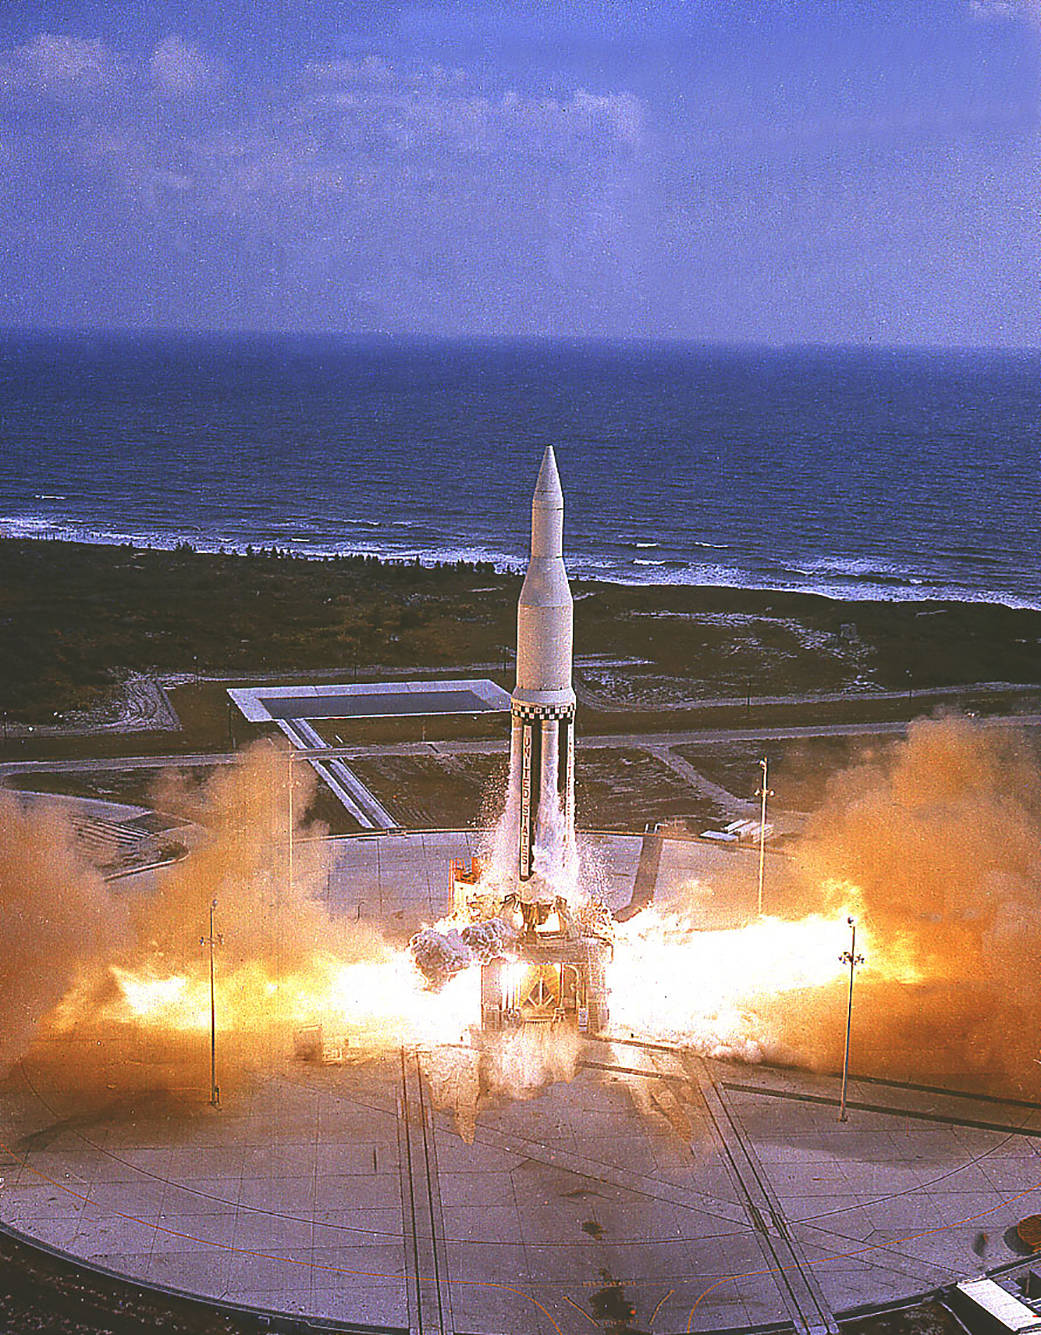 This week in 1961, marked a high point in the 3-year-old Saturn development program, as the first Saturn I vehicle, SA-1, flew.